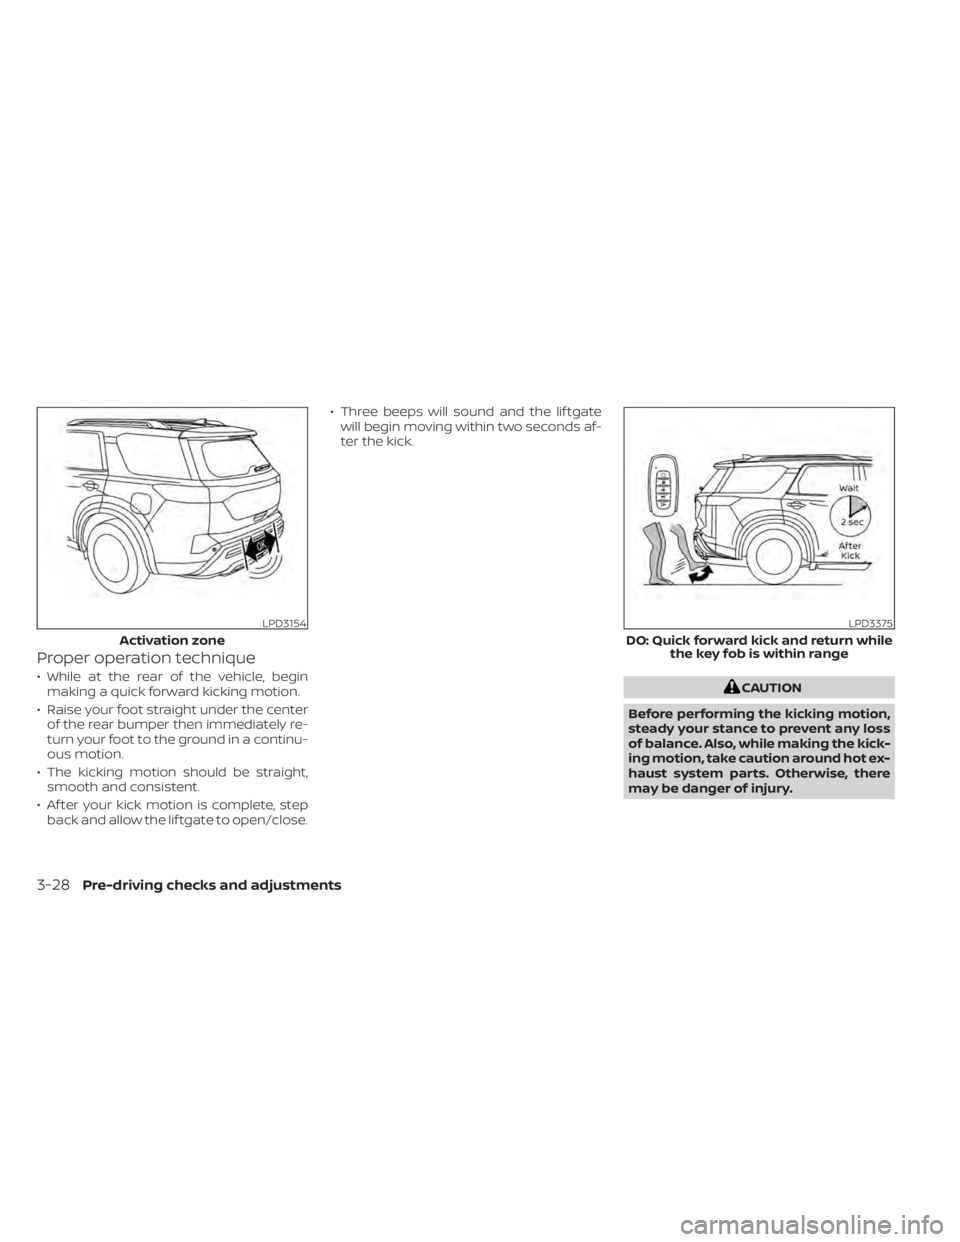 NISSAN PATHFINDER 2023  Owners Manual Proper operation technique
• While at the rear of the vehicle, beginmaking a quick forward kicking motion.
• Raise your foot straight under the center of the rear bumper then immediately re-
turn 